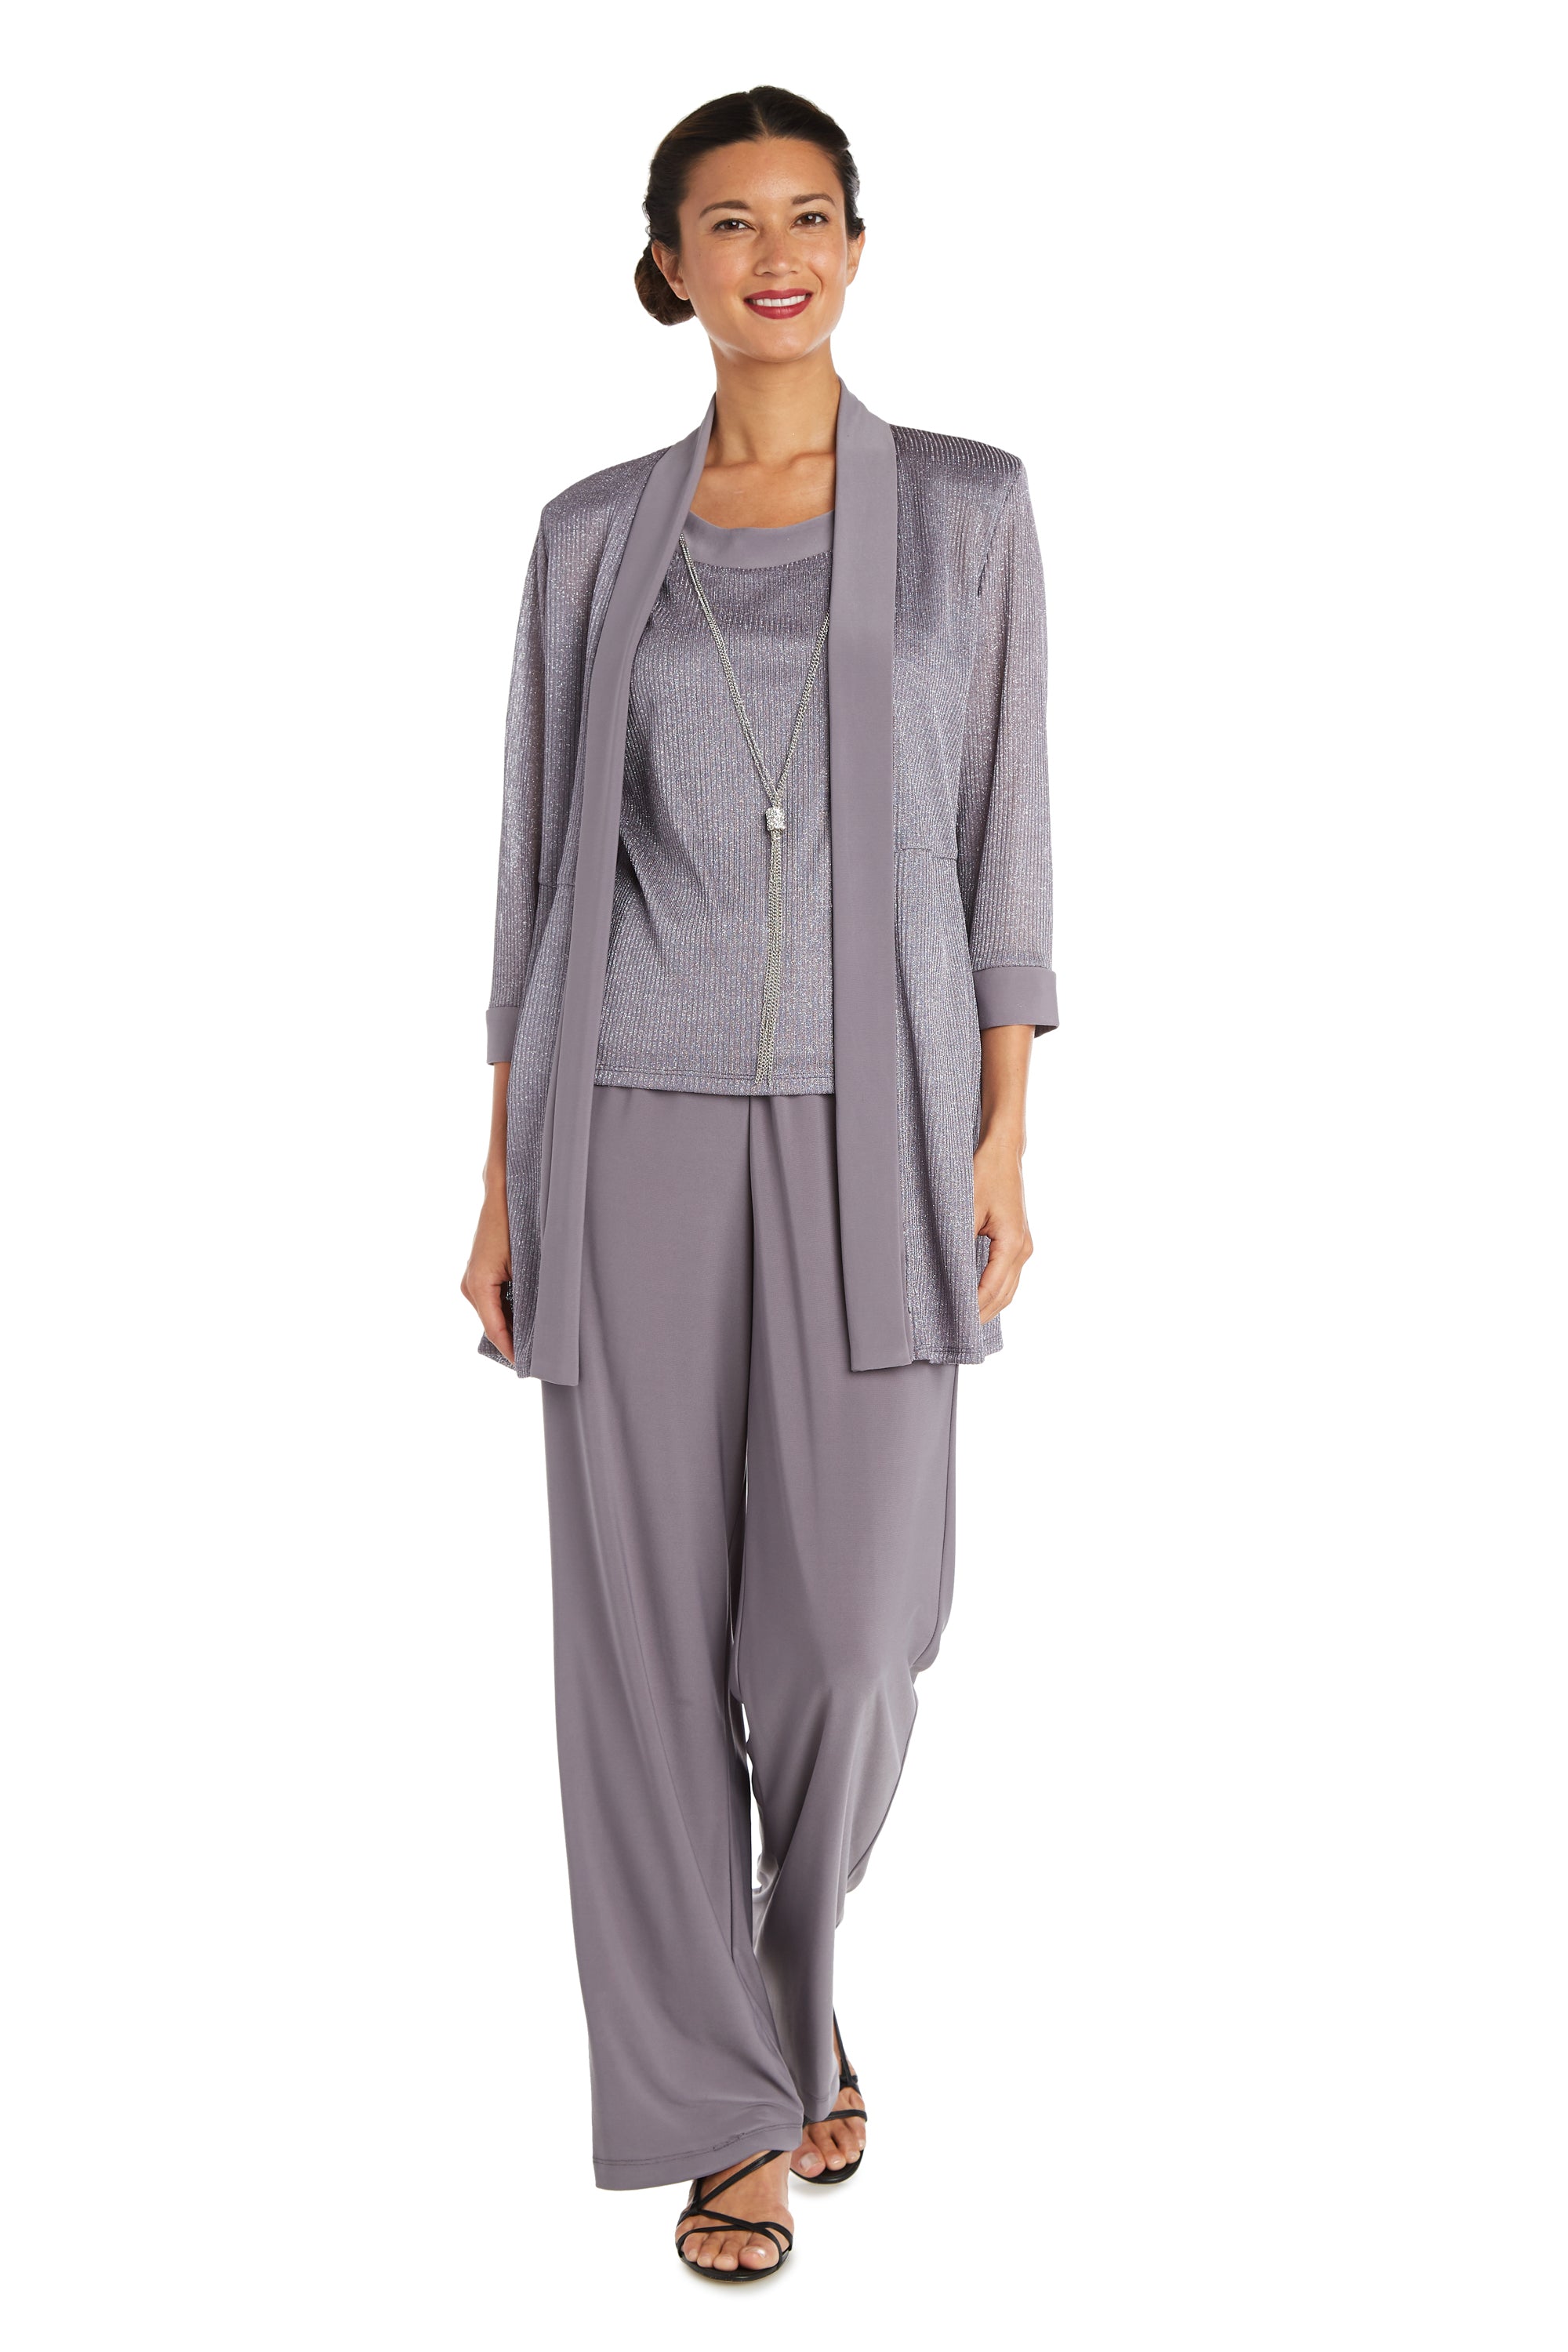 R&M Richards 7772 Mother Of The Bride Formal Pant Suit Slate / 6